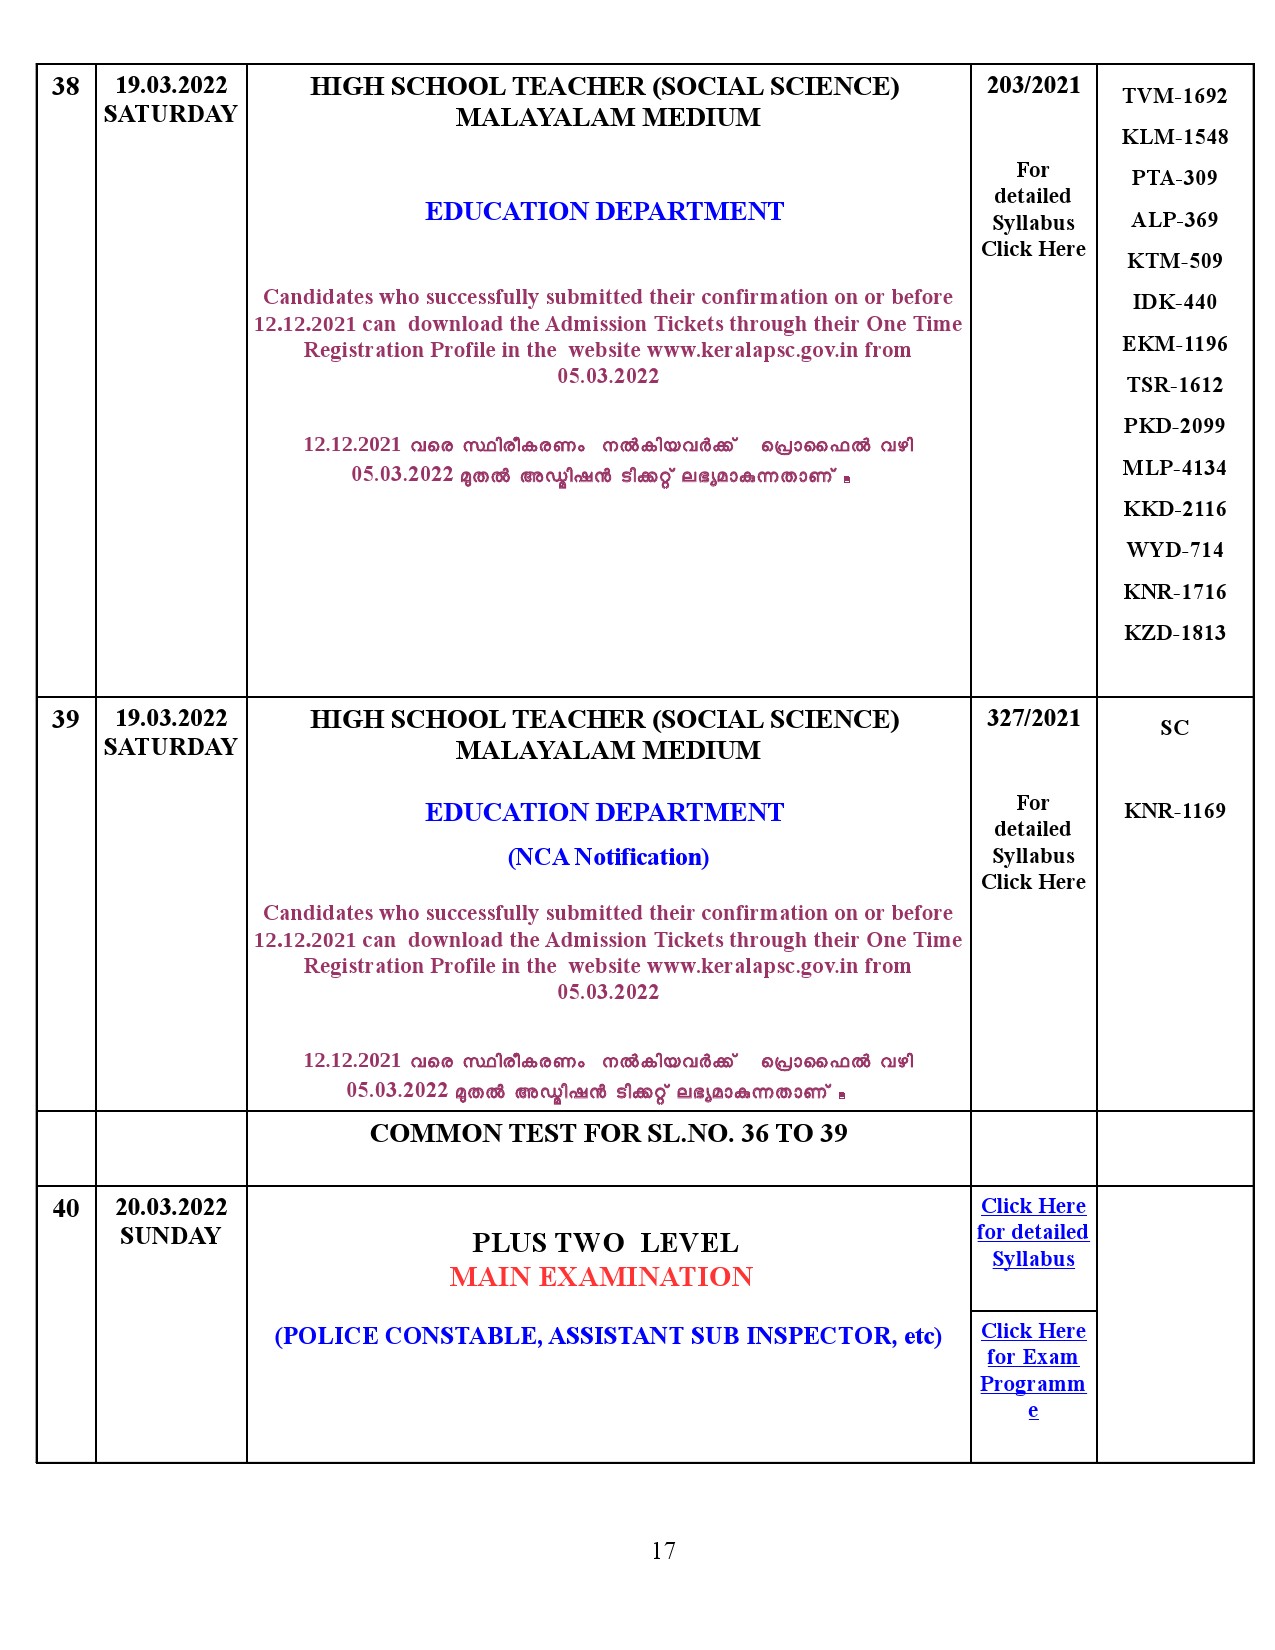 Modified Examination Programme For The Month Of March 2022 - Notification Image 17